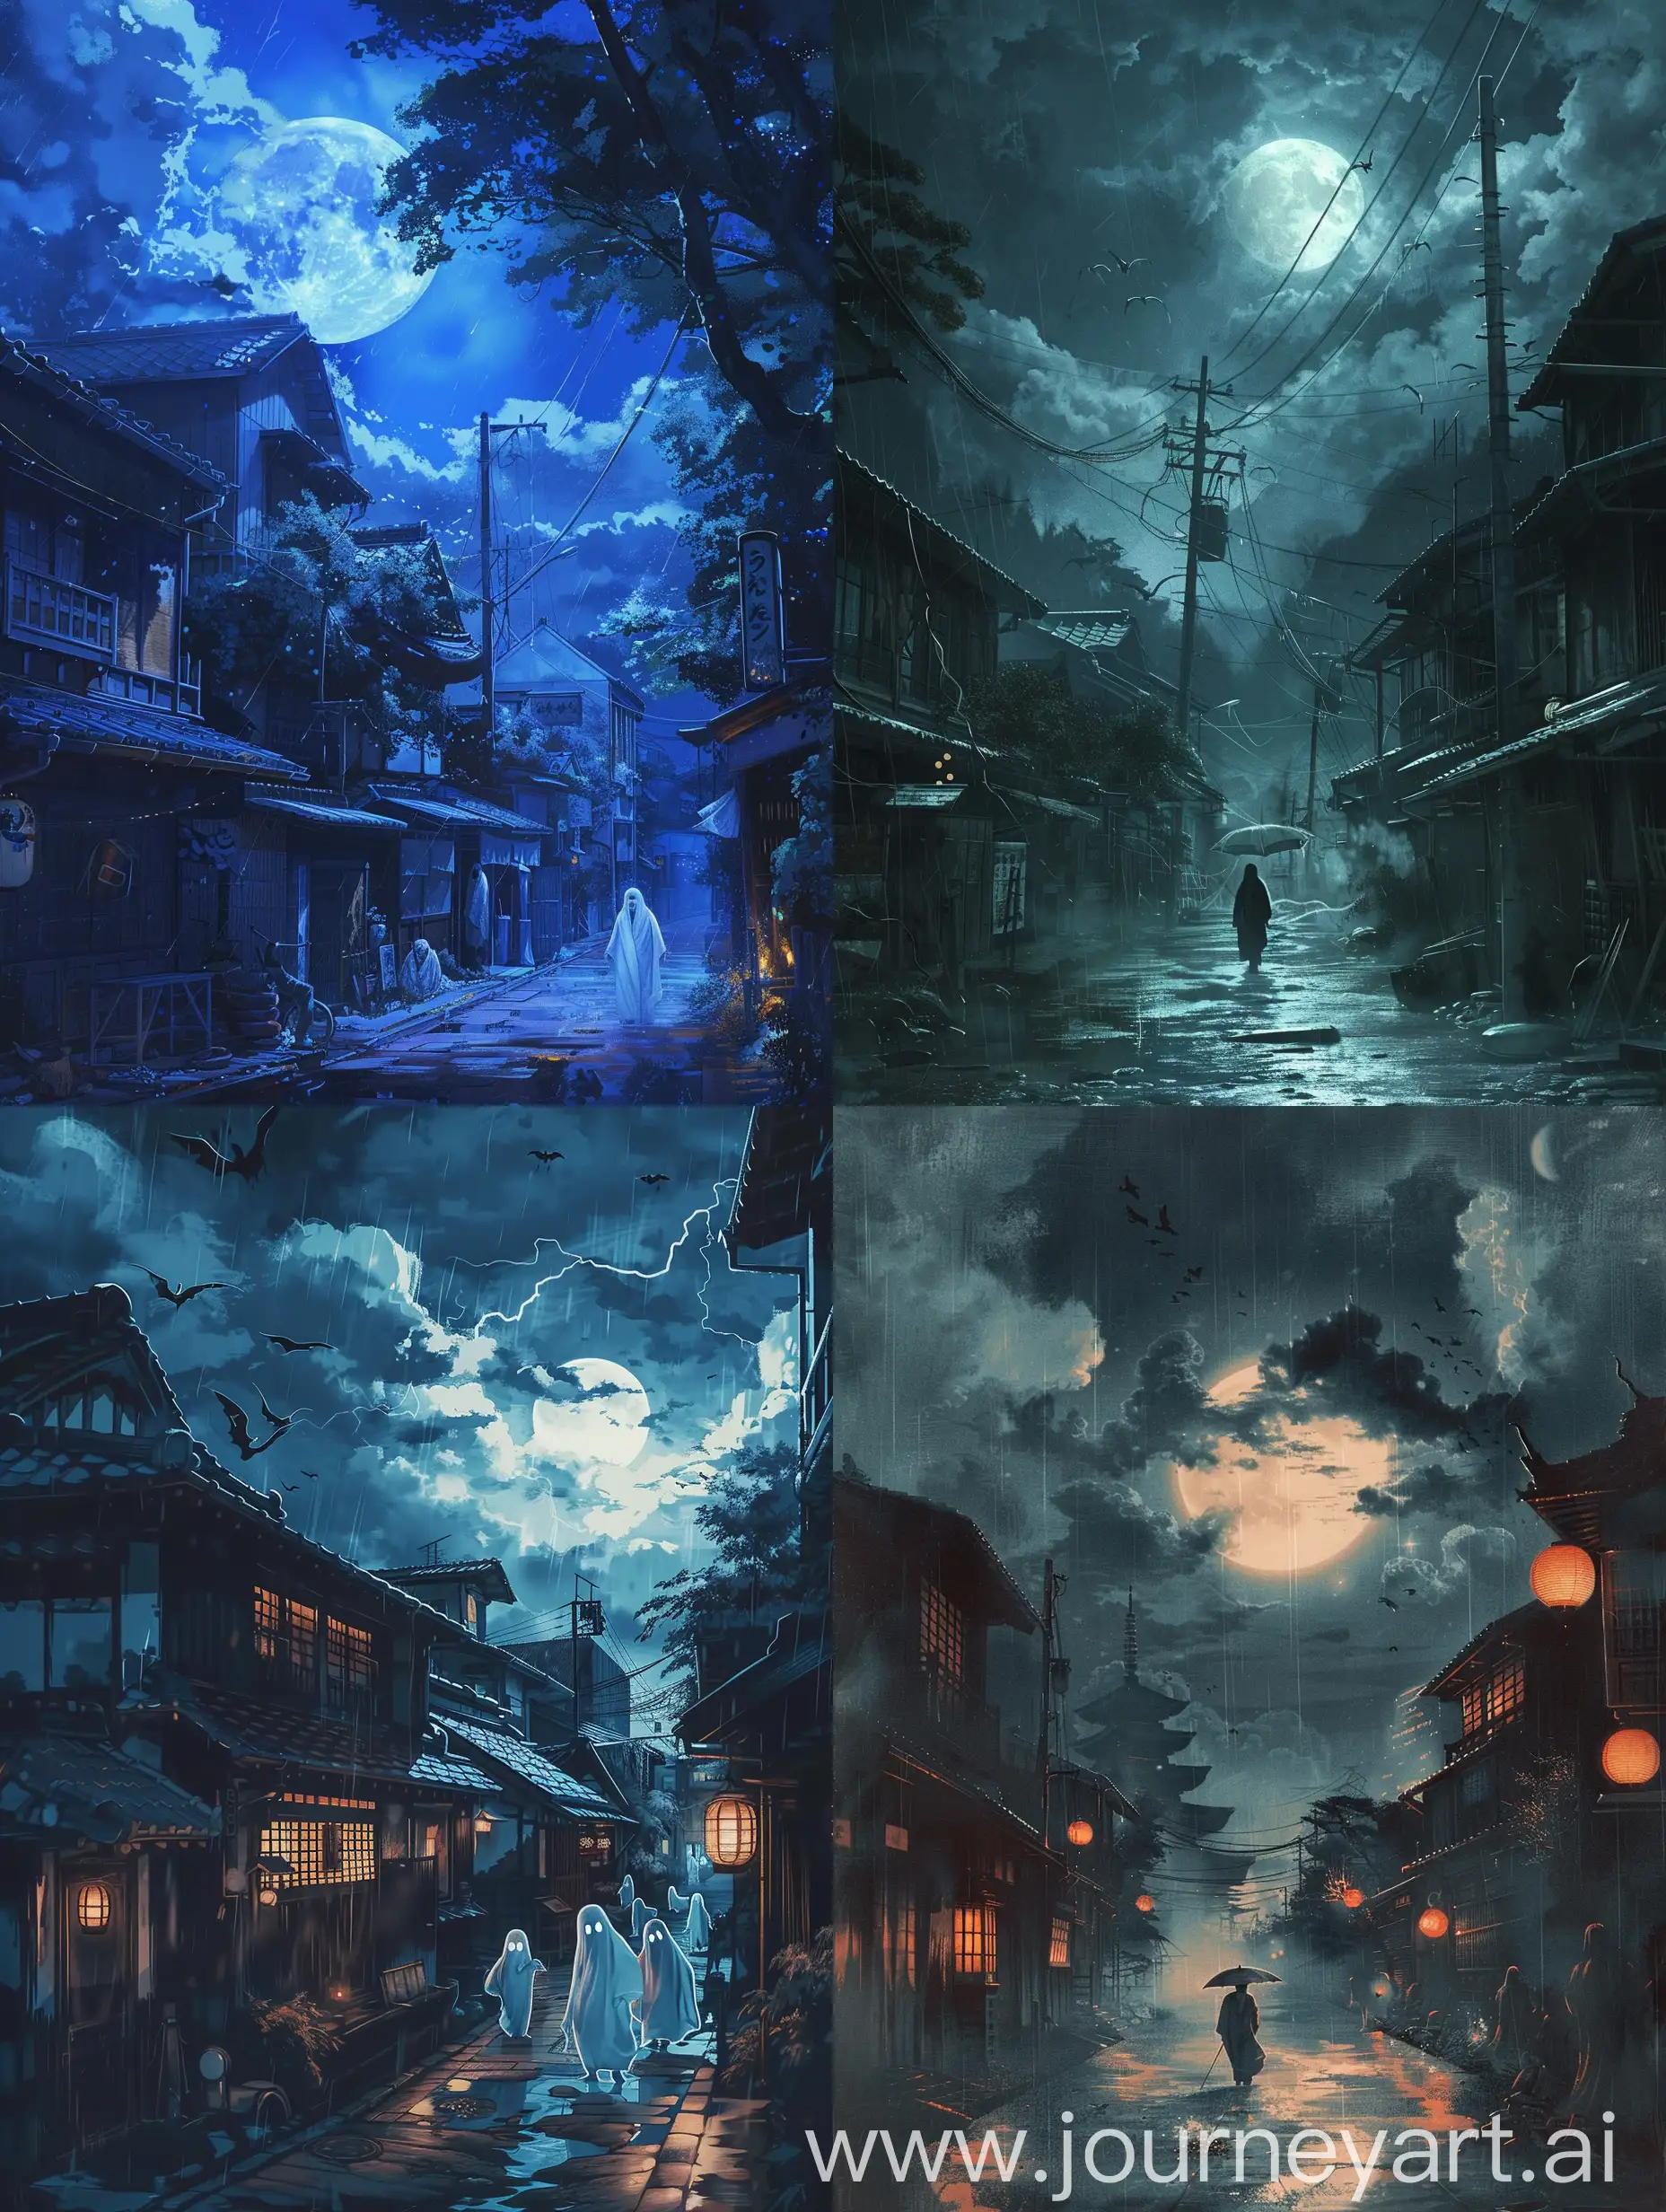 Japanese  ghosts,  appear in the moonlit streets of Tokyo, stormy skies and evil omen